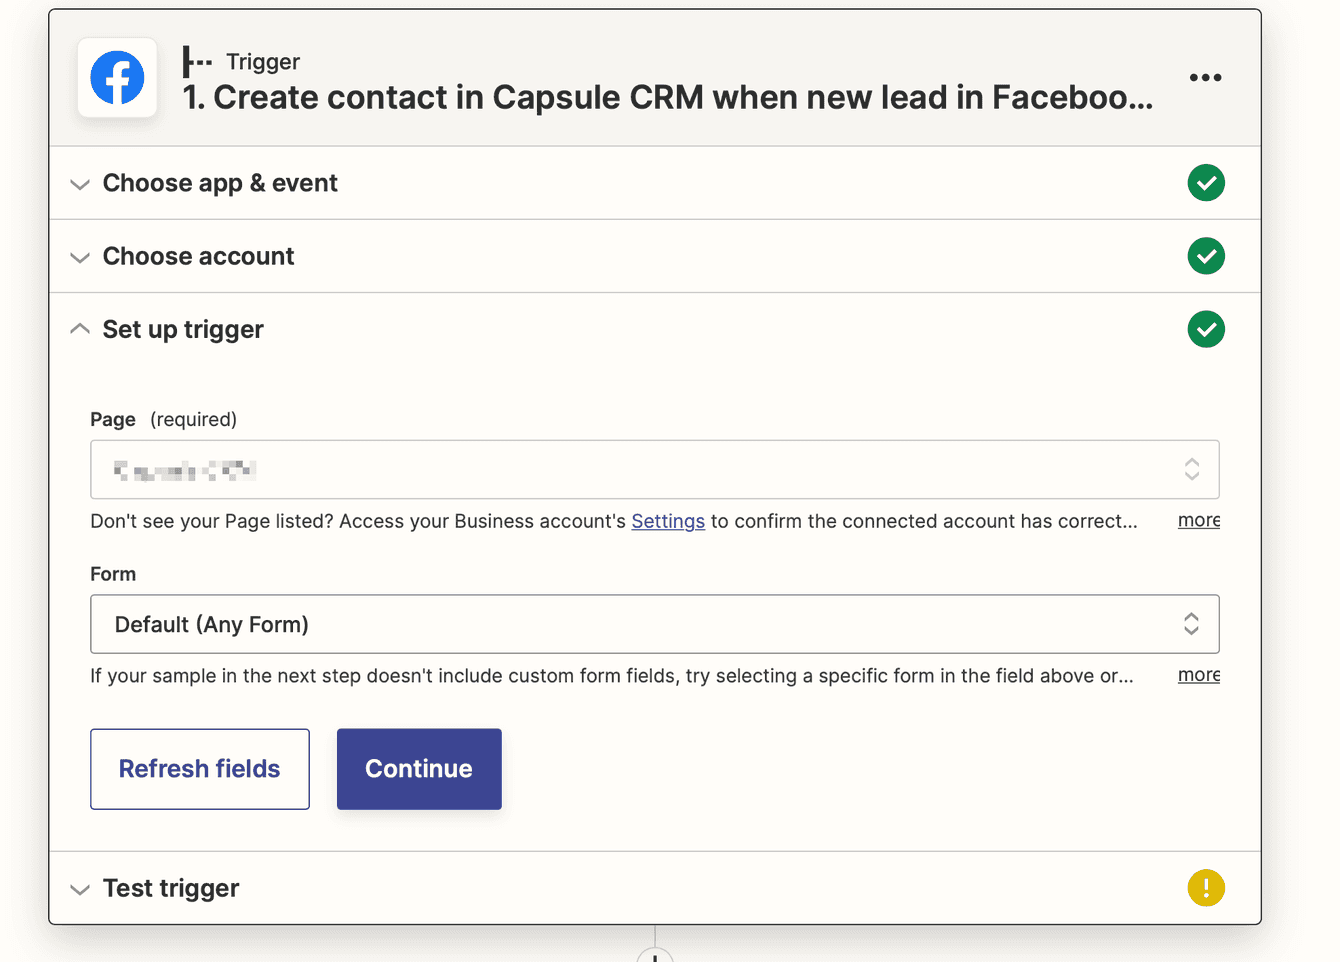 How to select a page and form when setting up the Facebook to Capsule
Zap